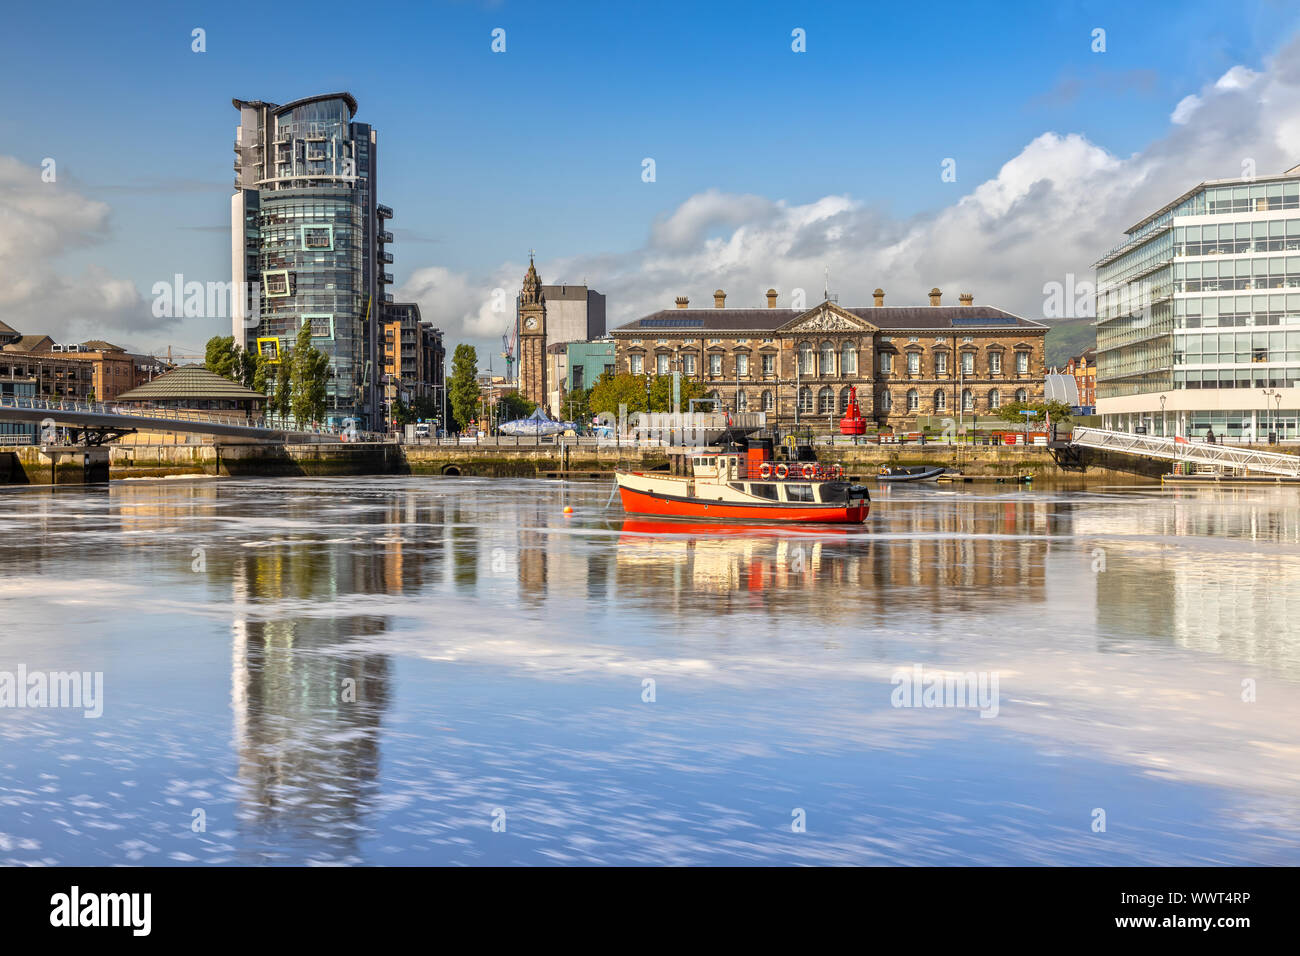 The Custom House and Lagan River in Belfast, Northern Ireland Stock Photo